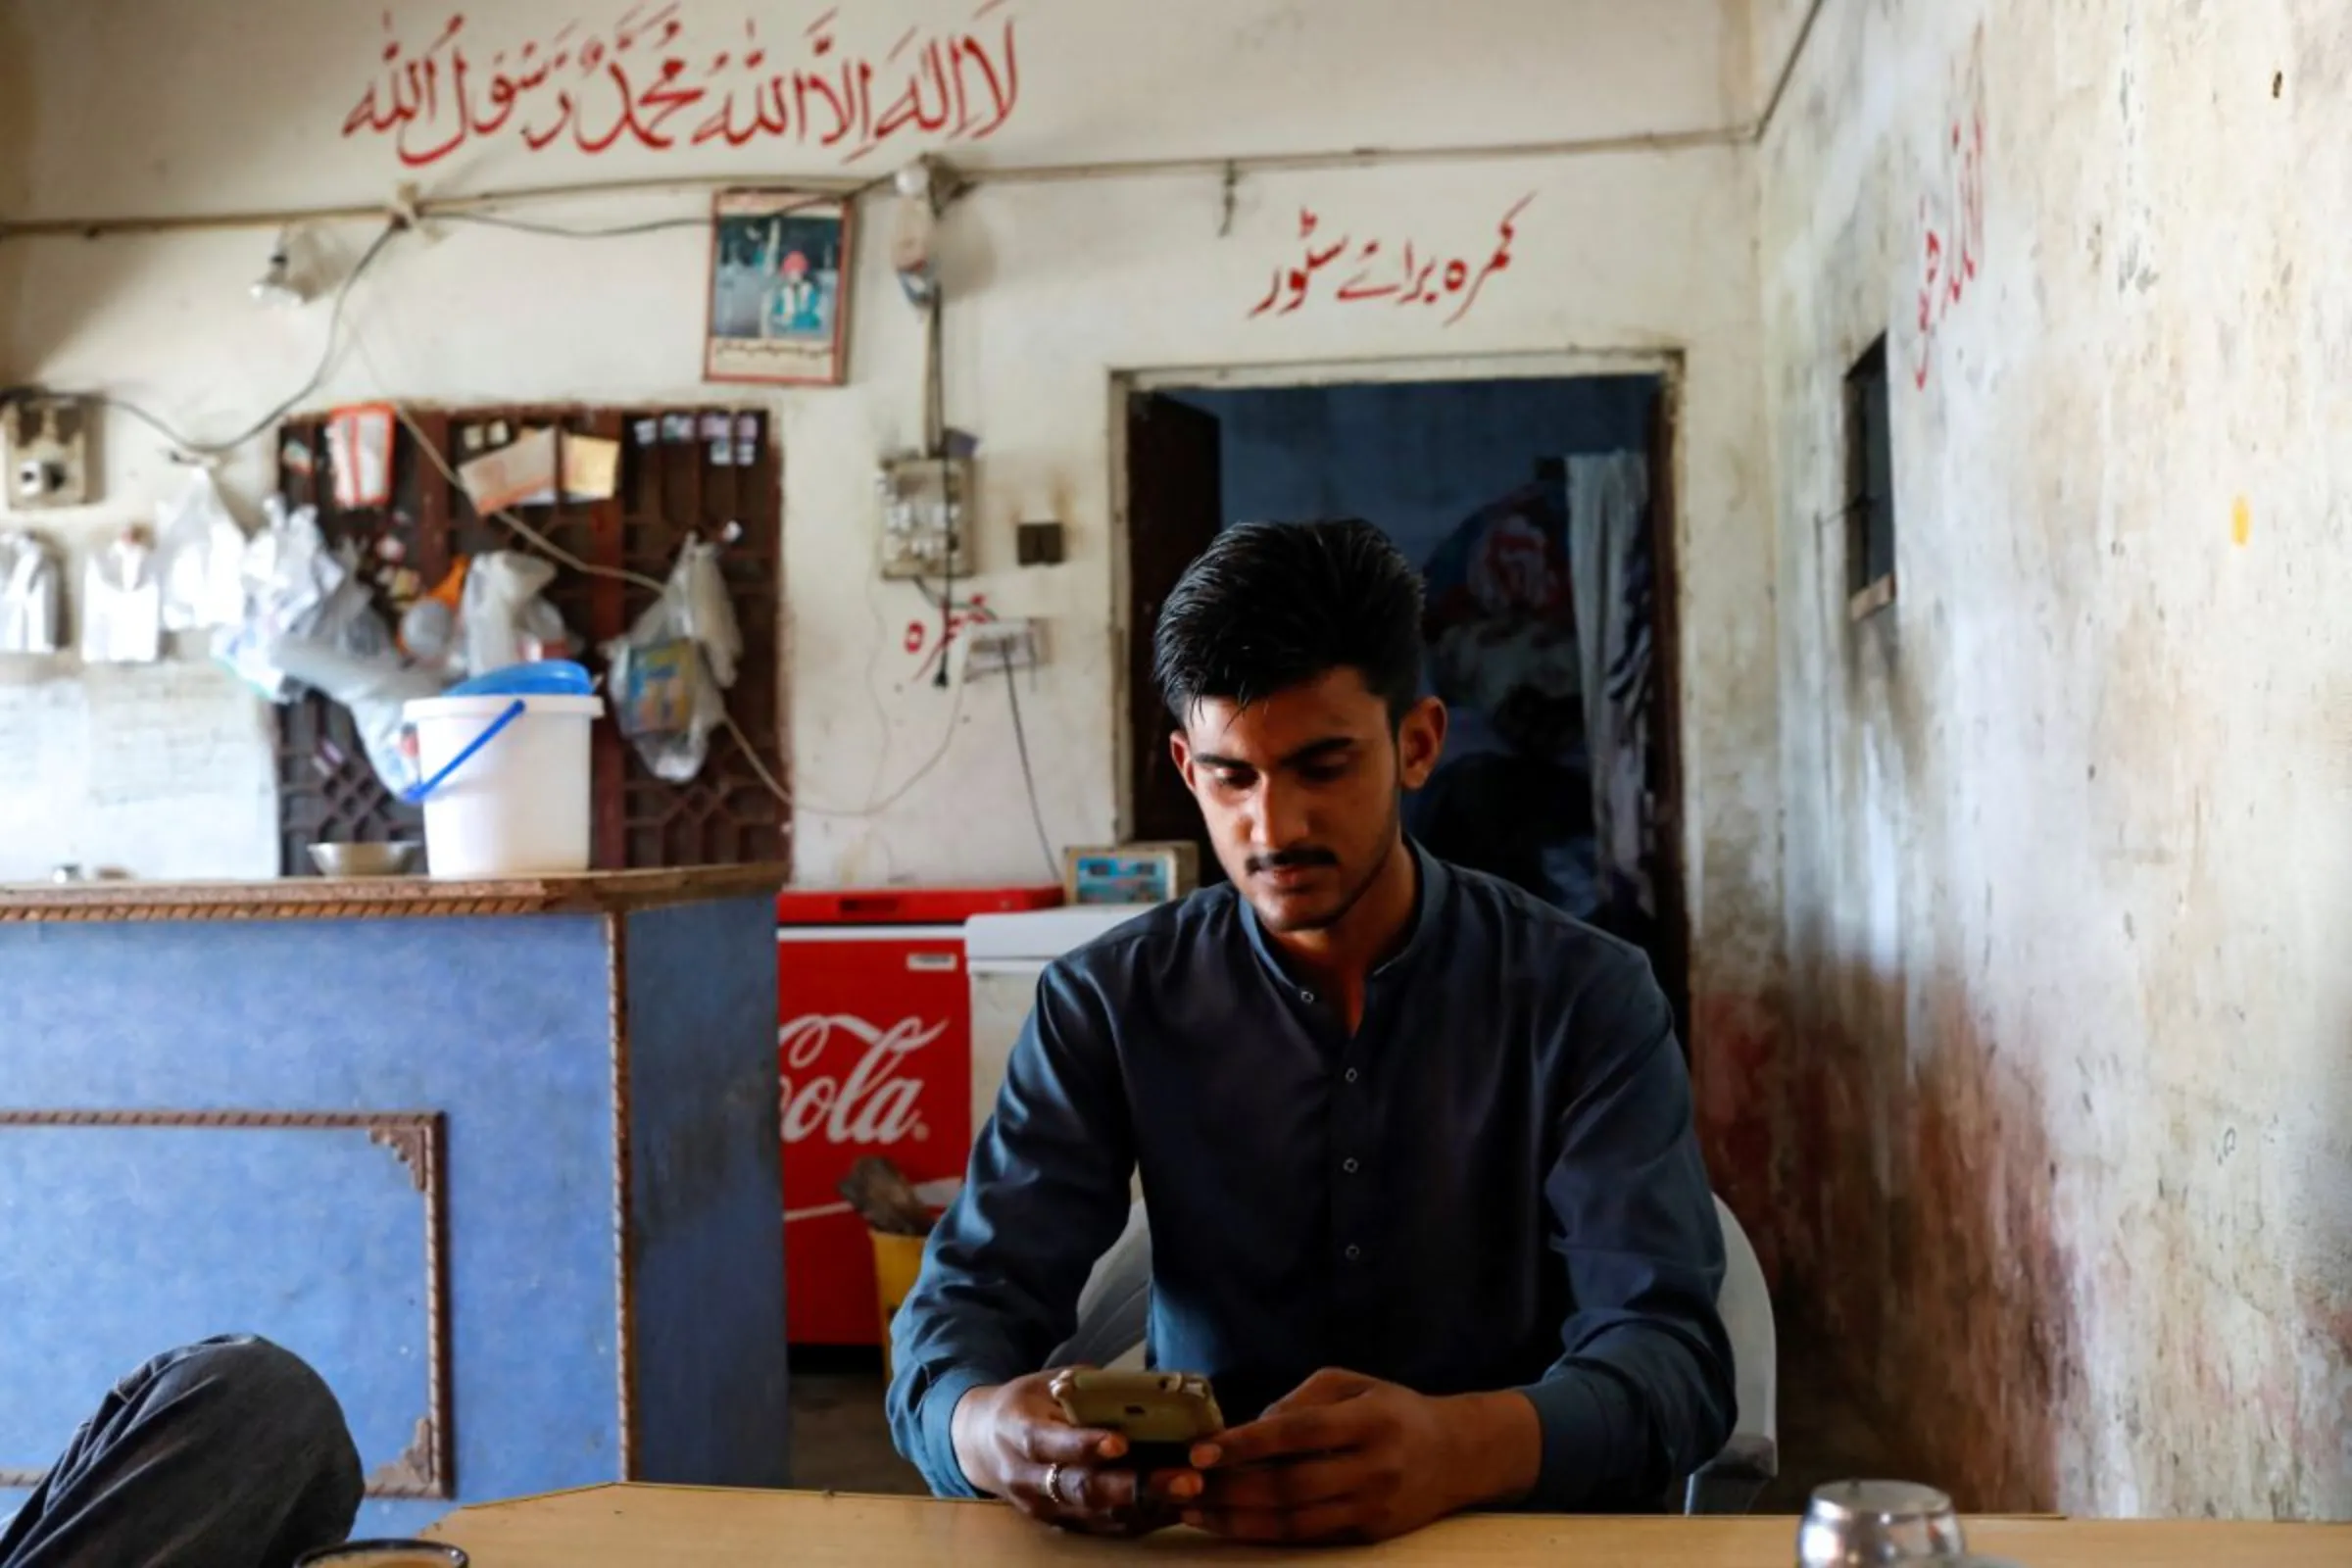 A man looks at pictures on a mobile phone, at a tea stall in Bhojpur town in Gujrat district of Punjab province, Pakistan March 7, 2023